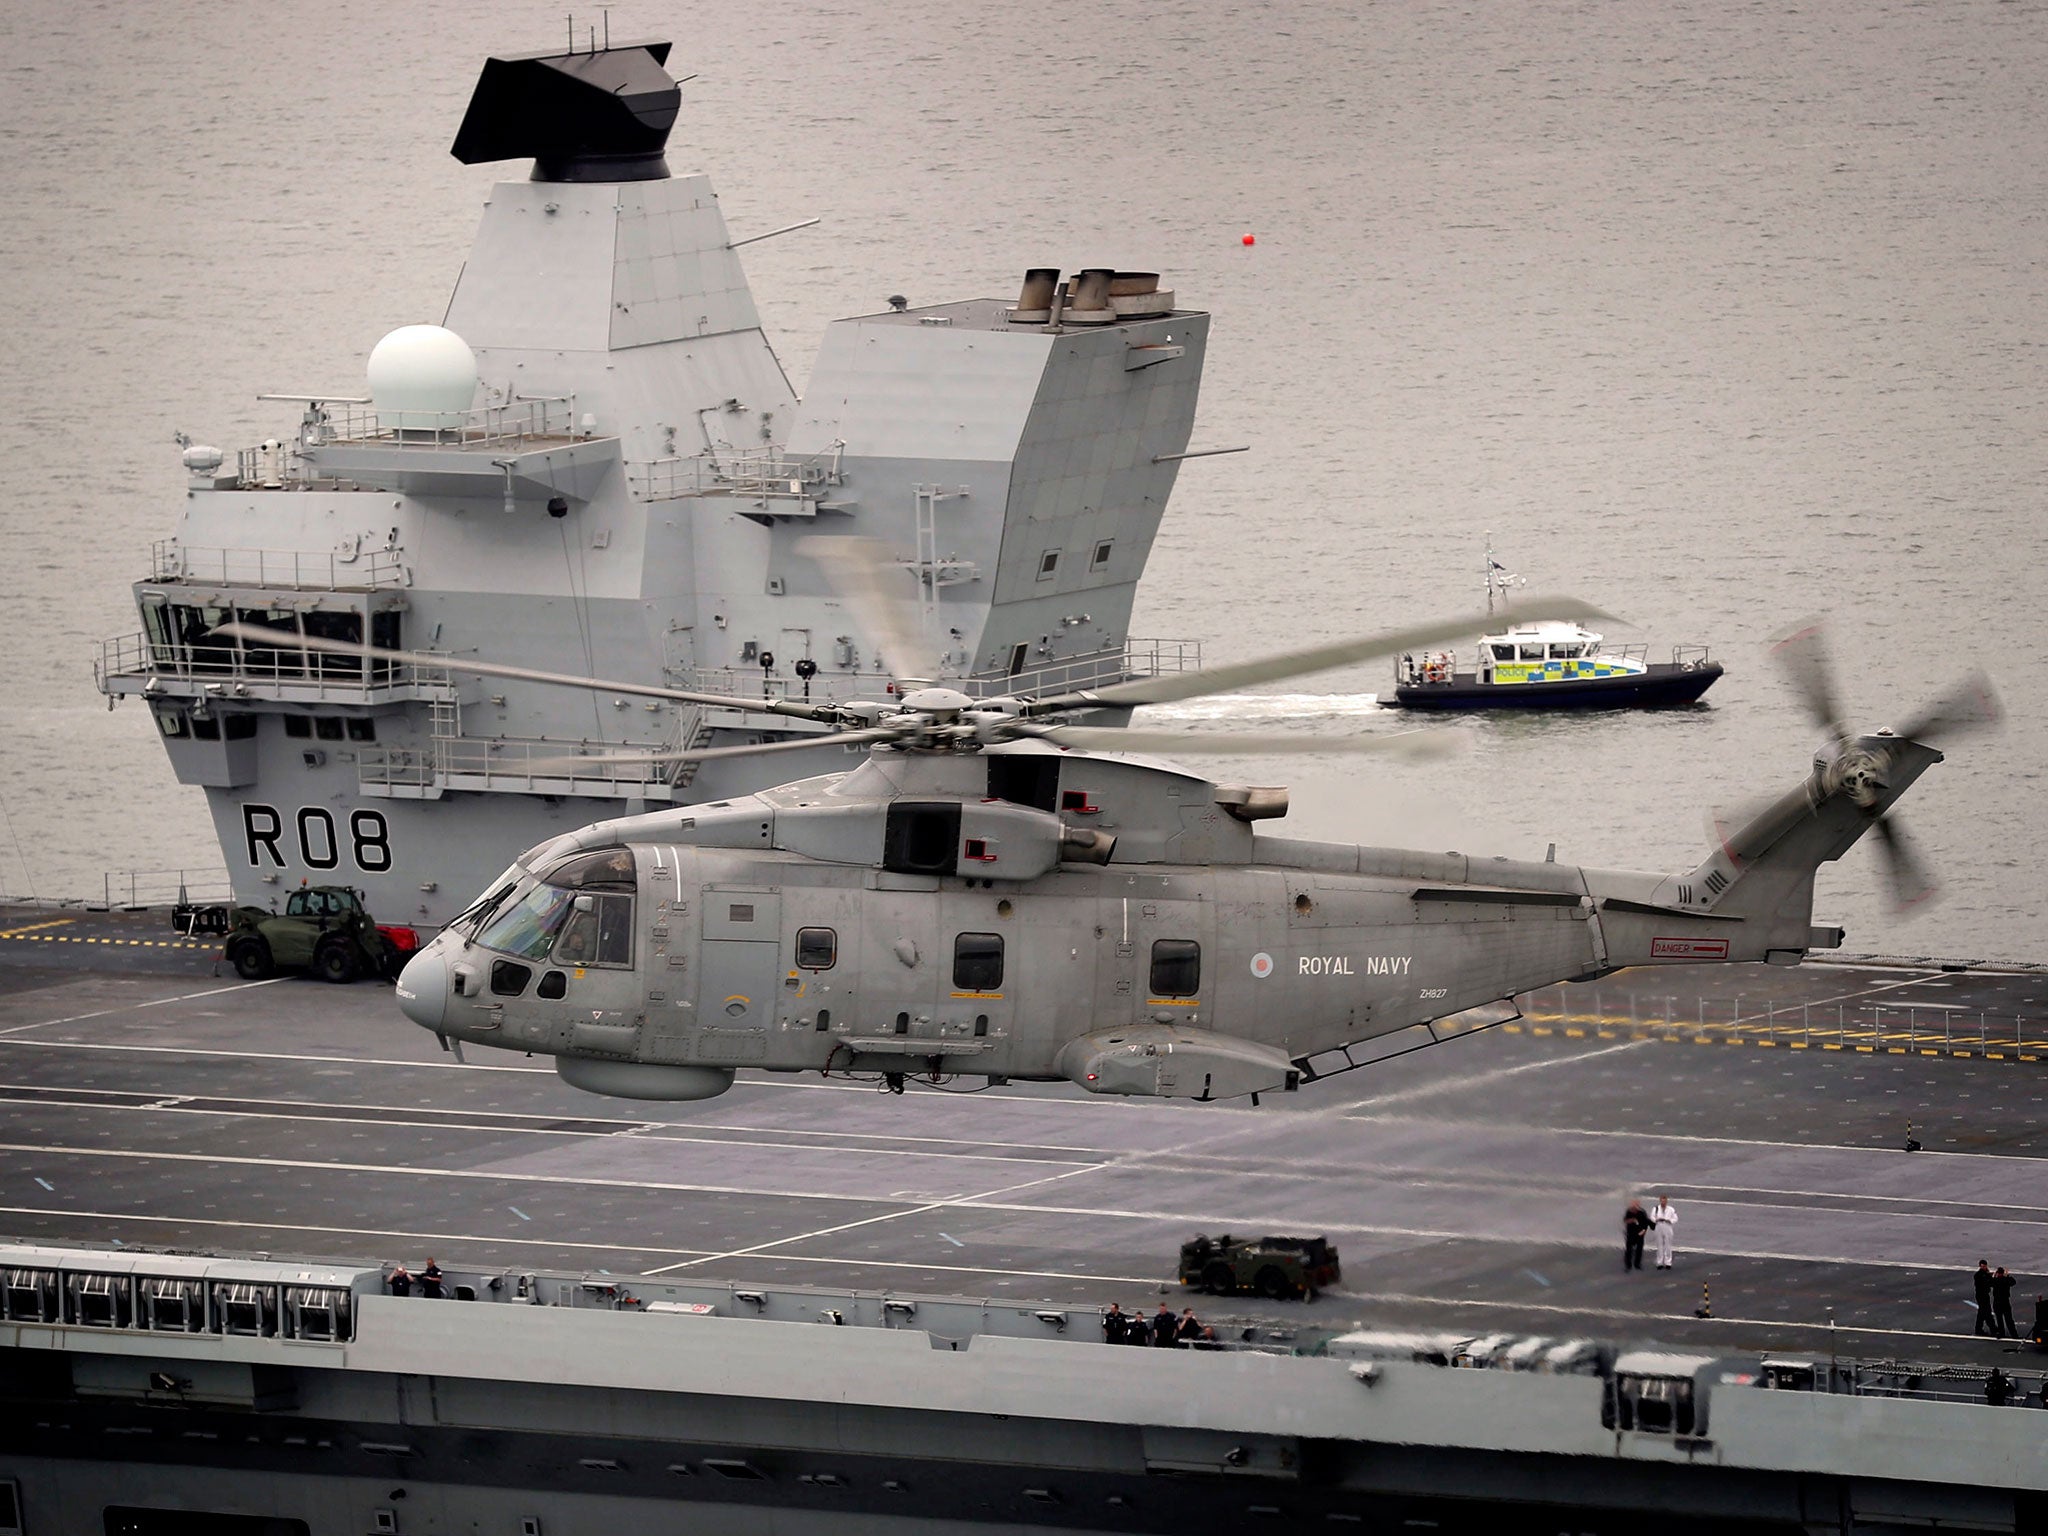 Britain’s delayed aircraft carrier programme has been heavily criticised amid spiralling costs